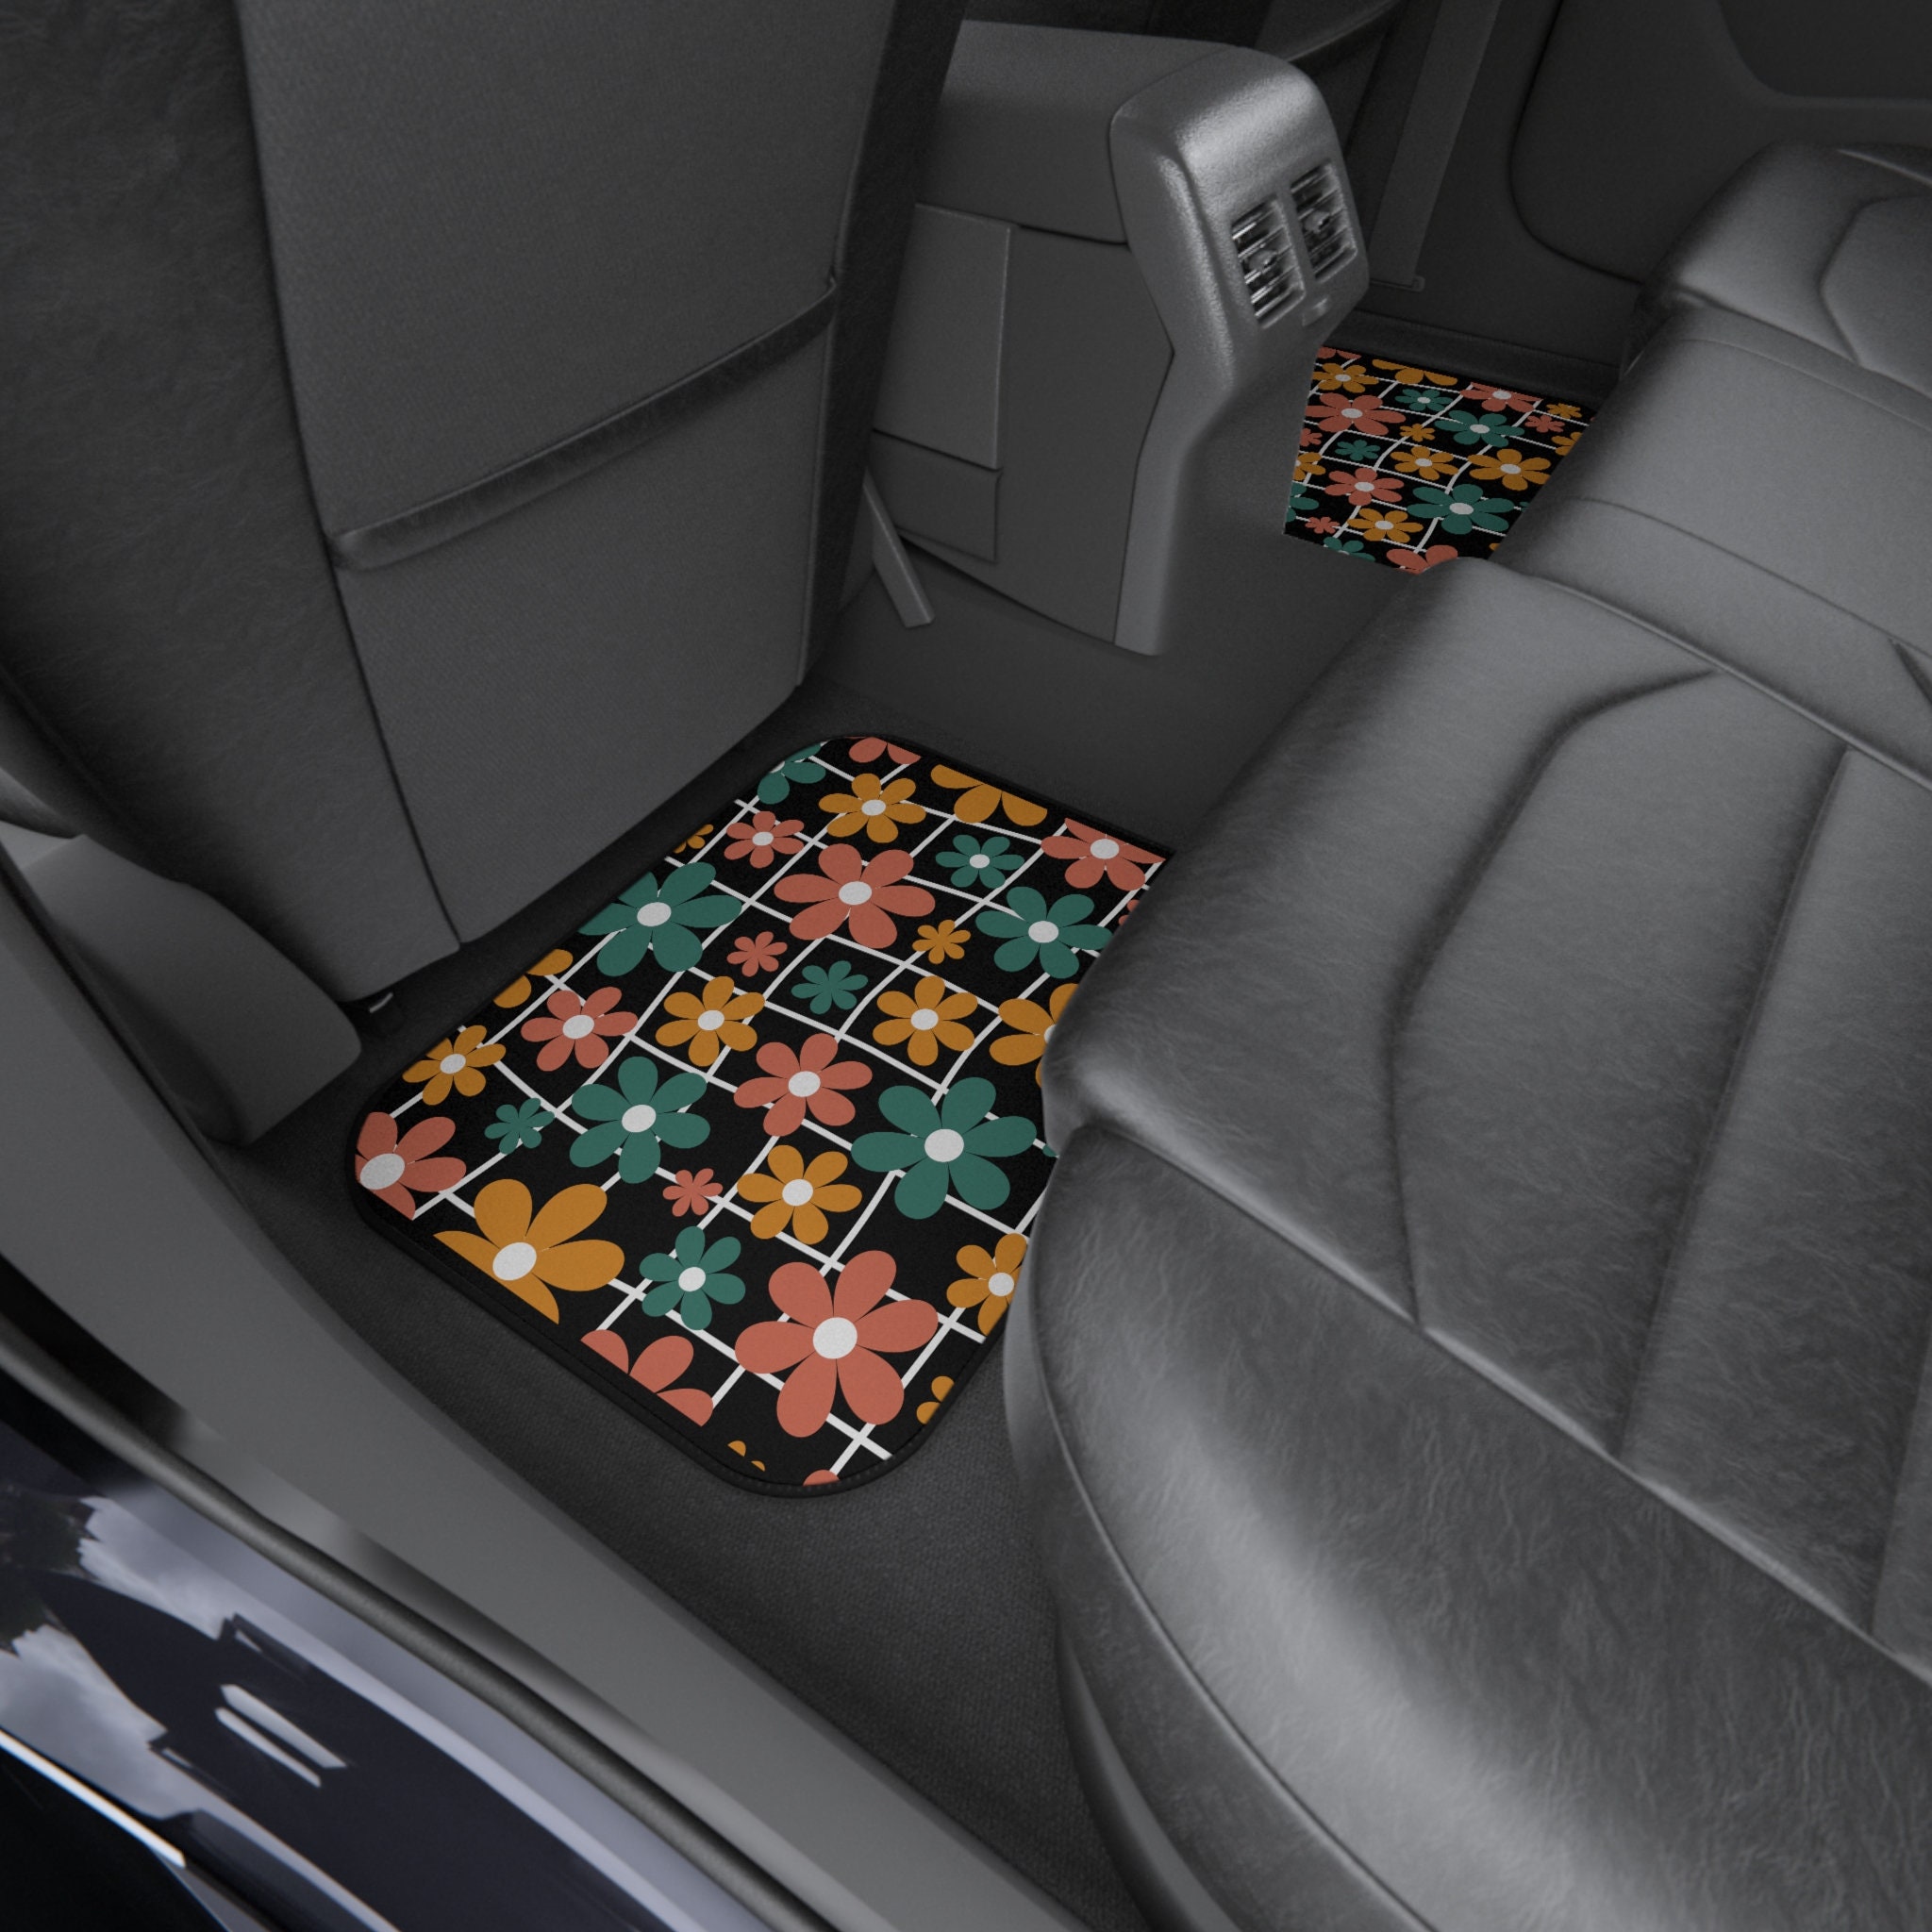 Discover Flower Retro Style Checkered Car Mats